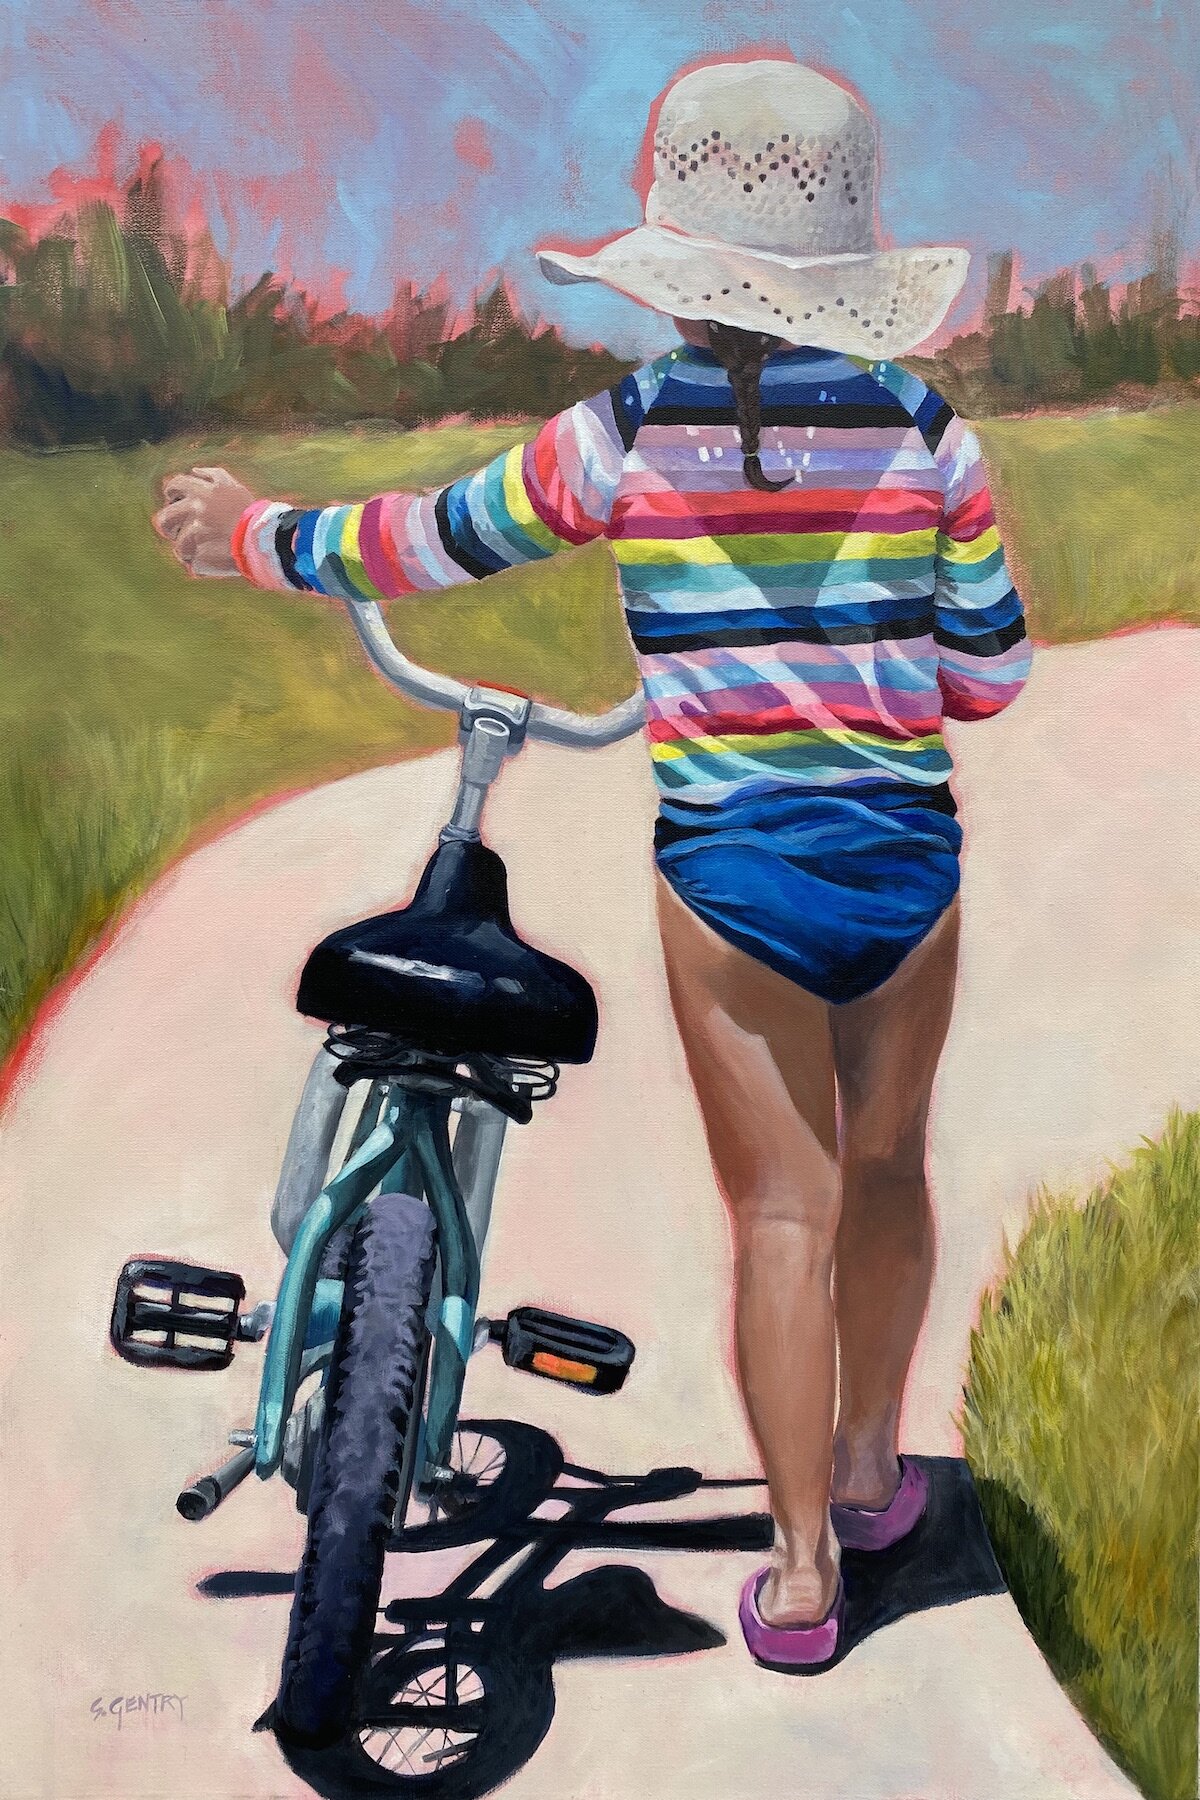    Heading Out  , 36” x 24”, acrylic on canvas 